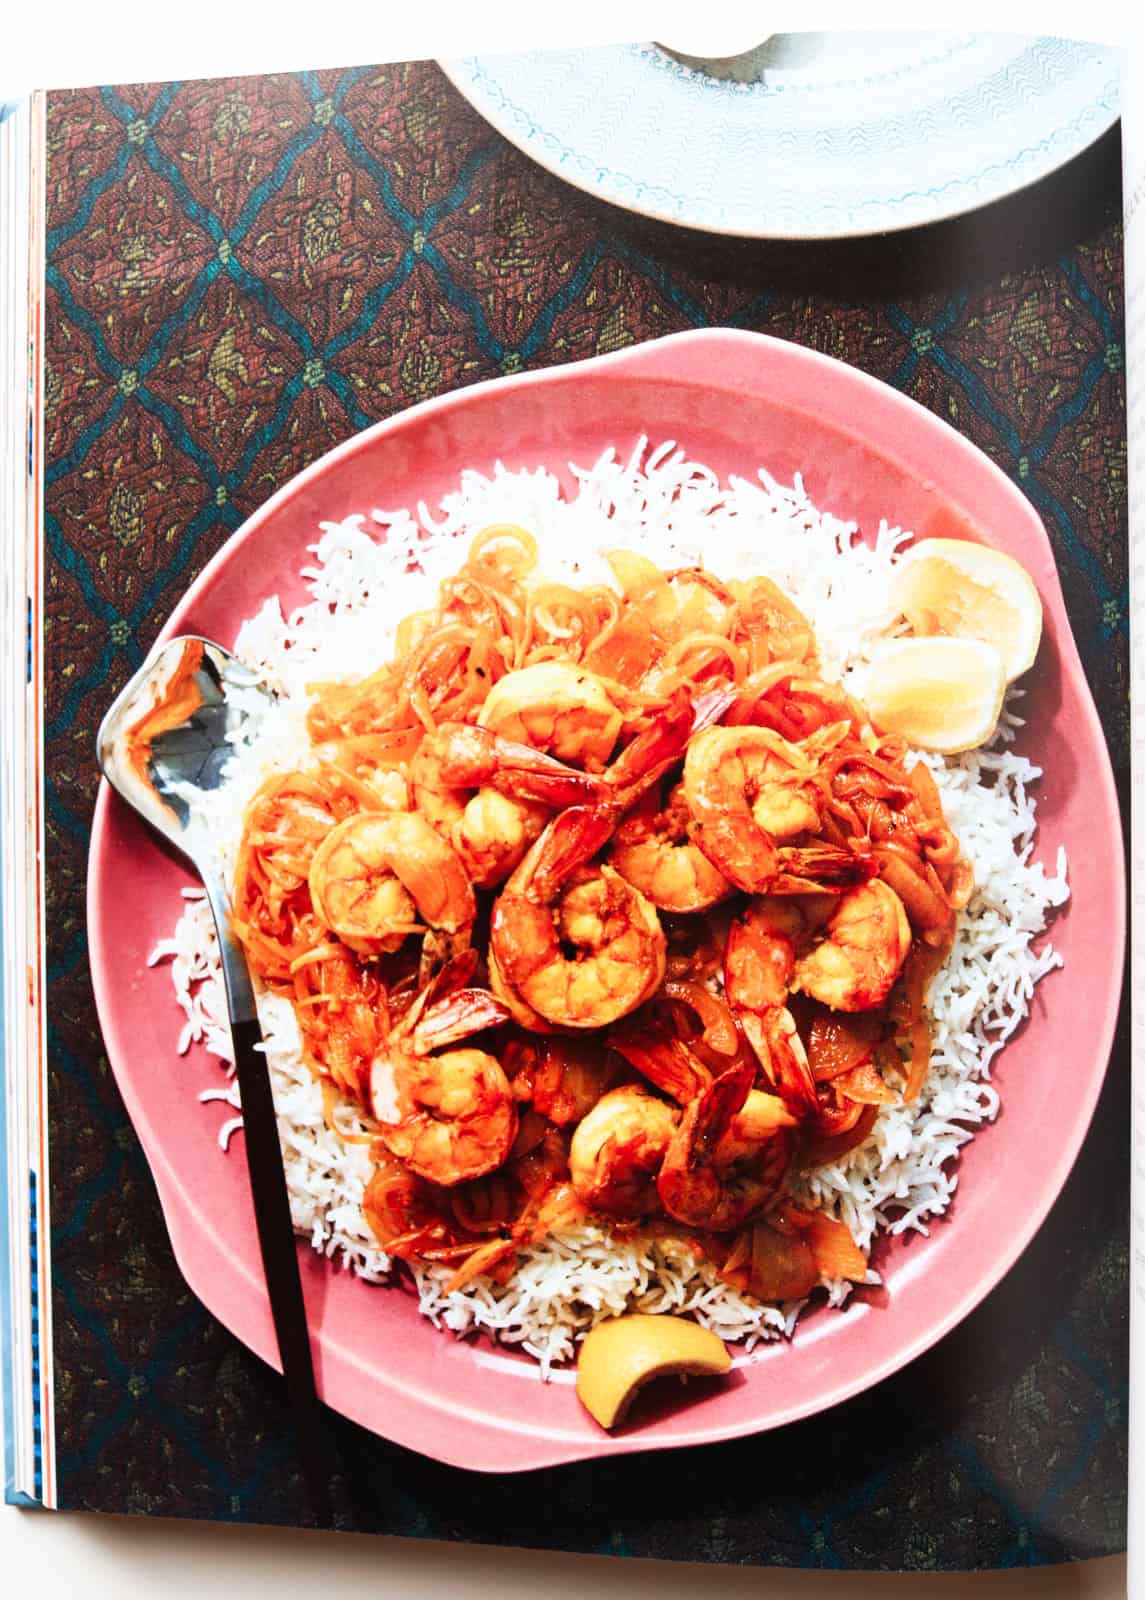 image of Persian-Style Shrimp and Rice from The Simple Art of Rice cookbook